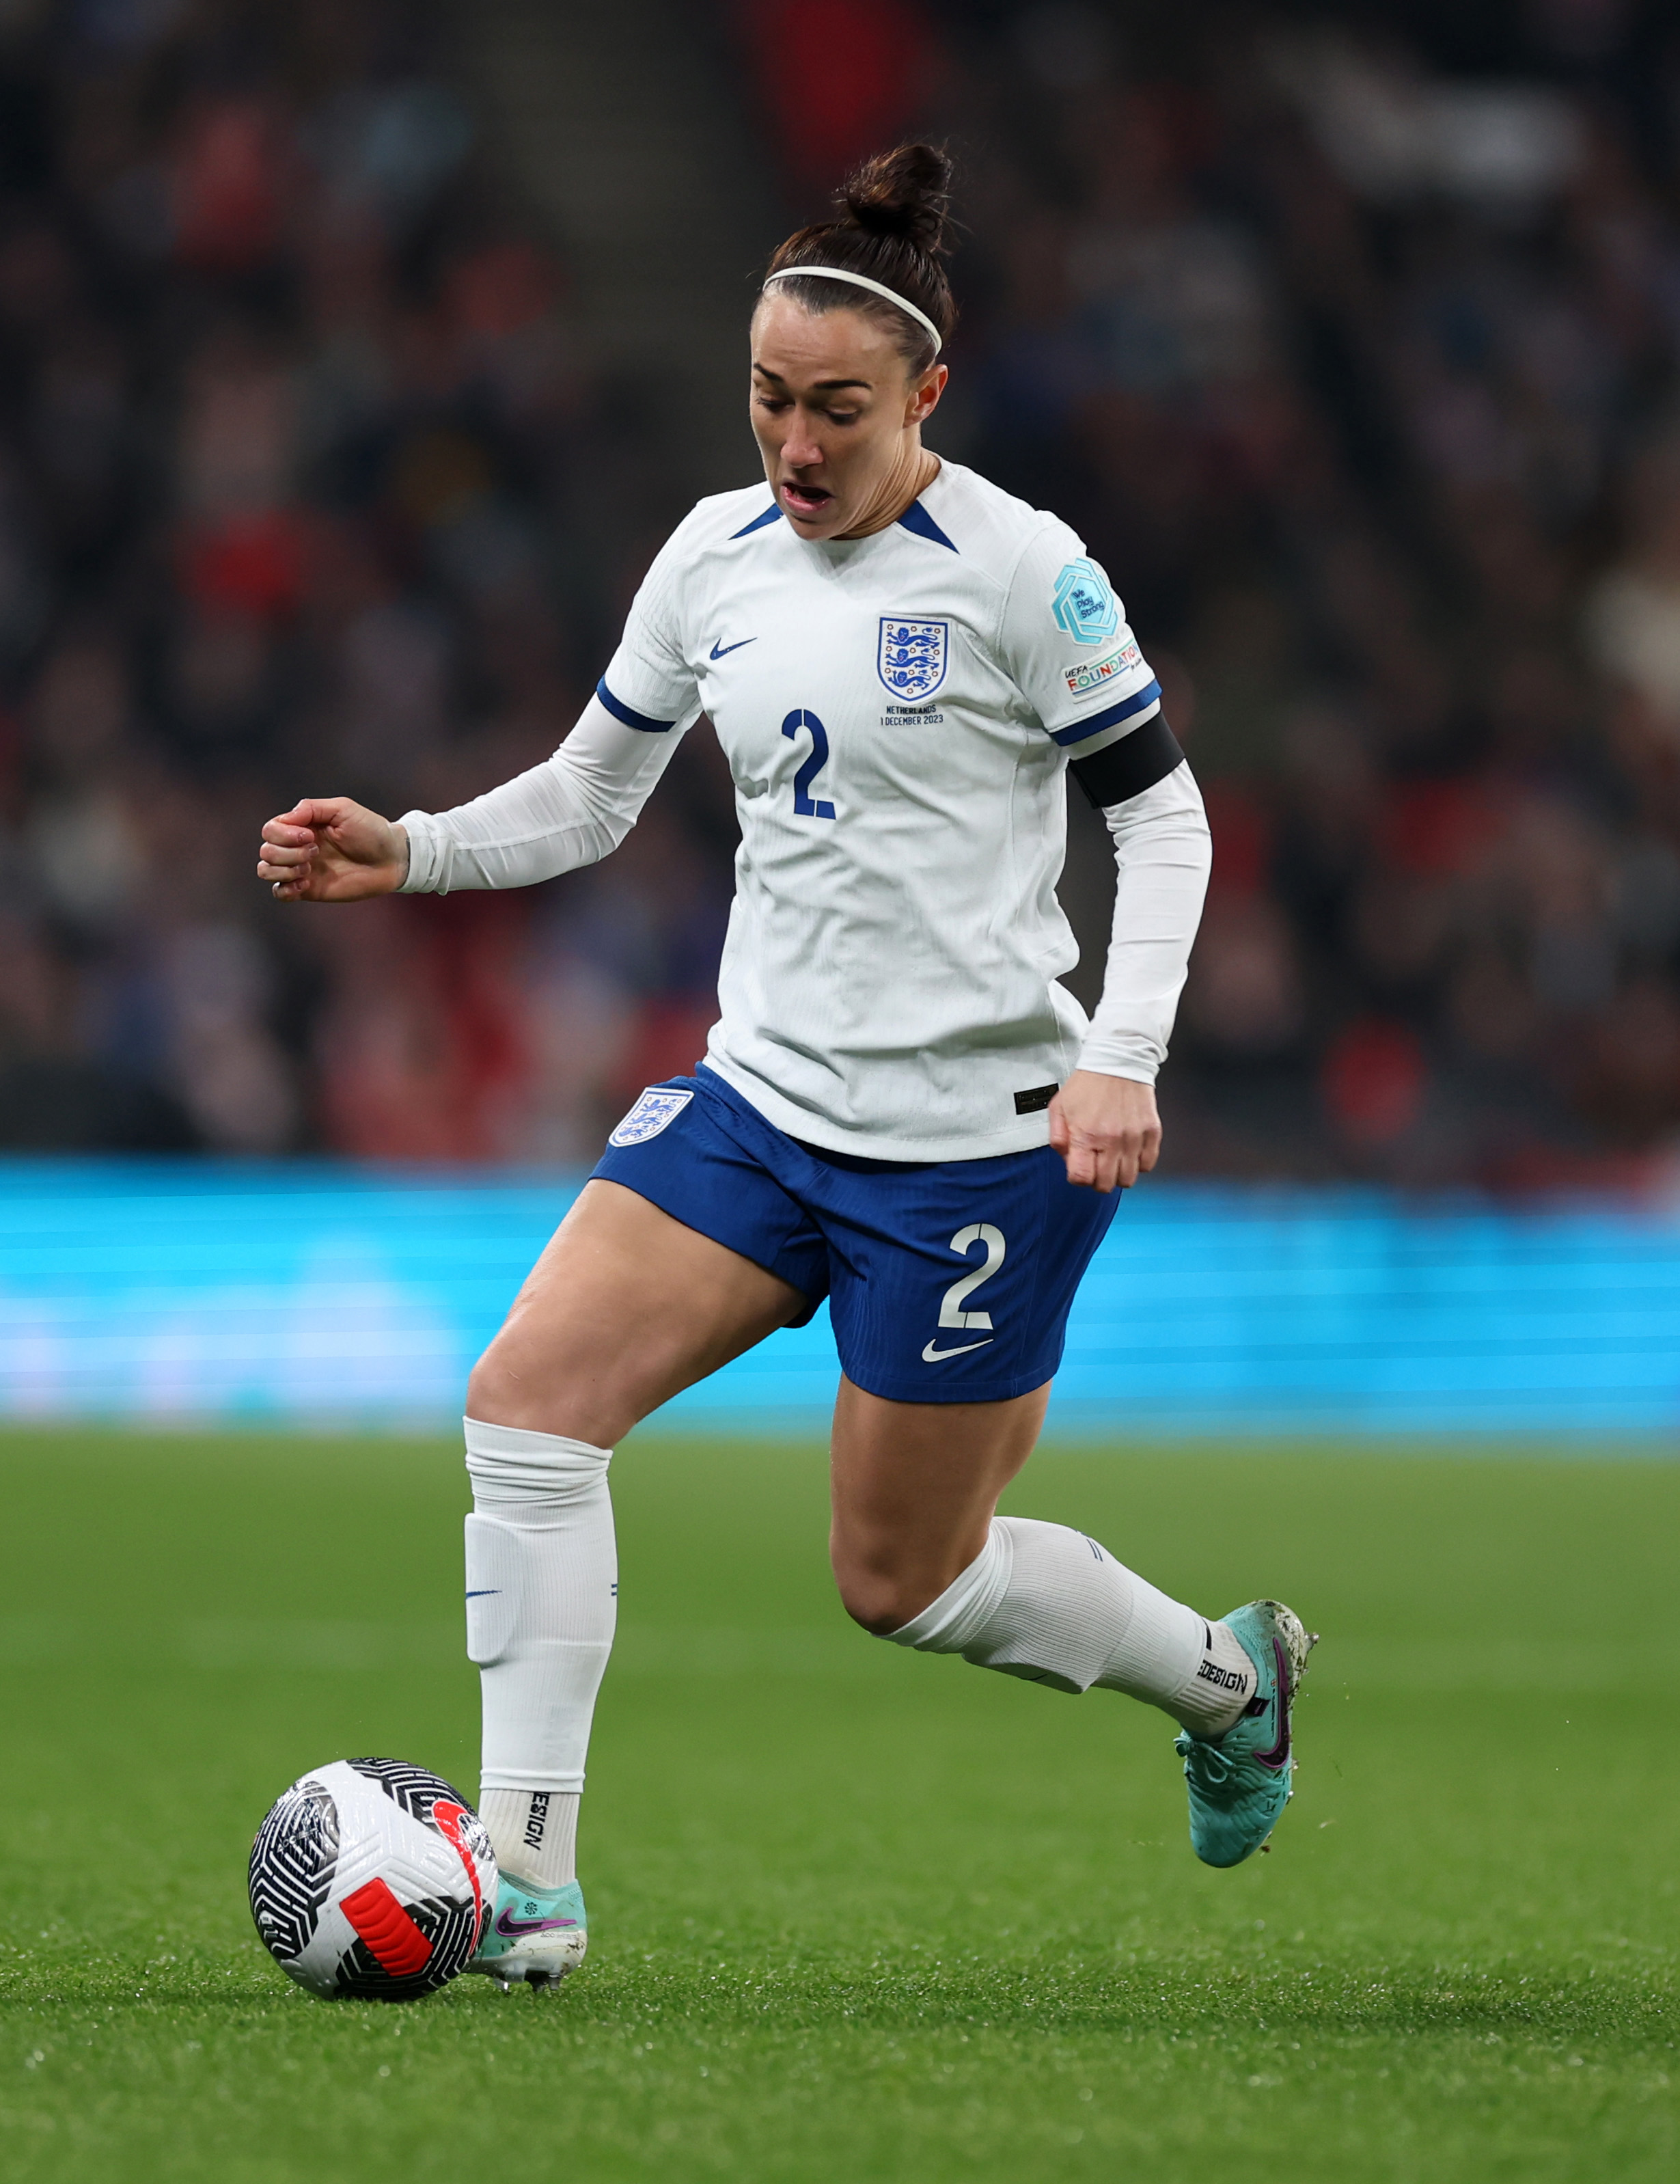 Lucy Bronze is a stalwart for club and country